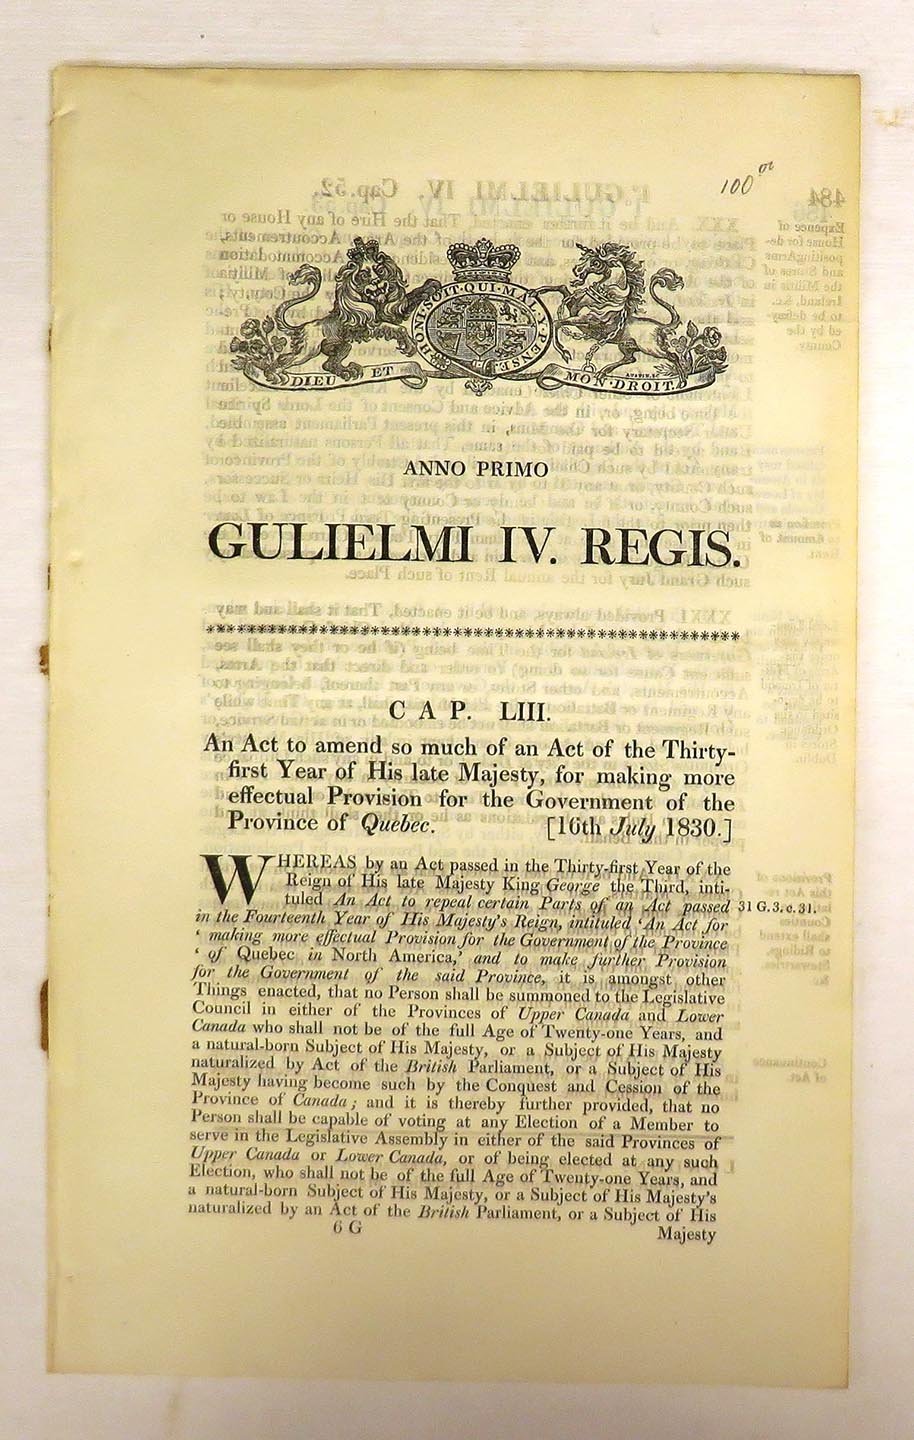 An Act to amend so much of an Act of the thirty-first year of His late Majesty, for making more effectual Provision for the Government of the Province of Quebec